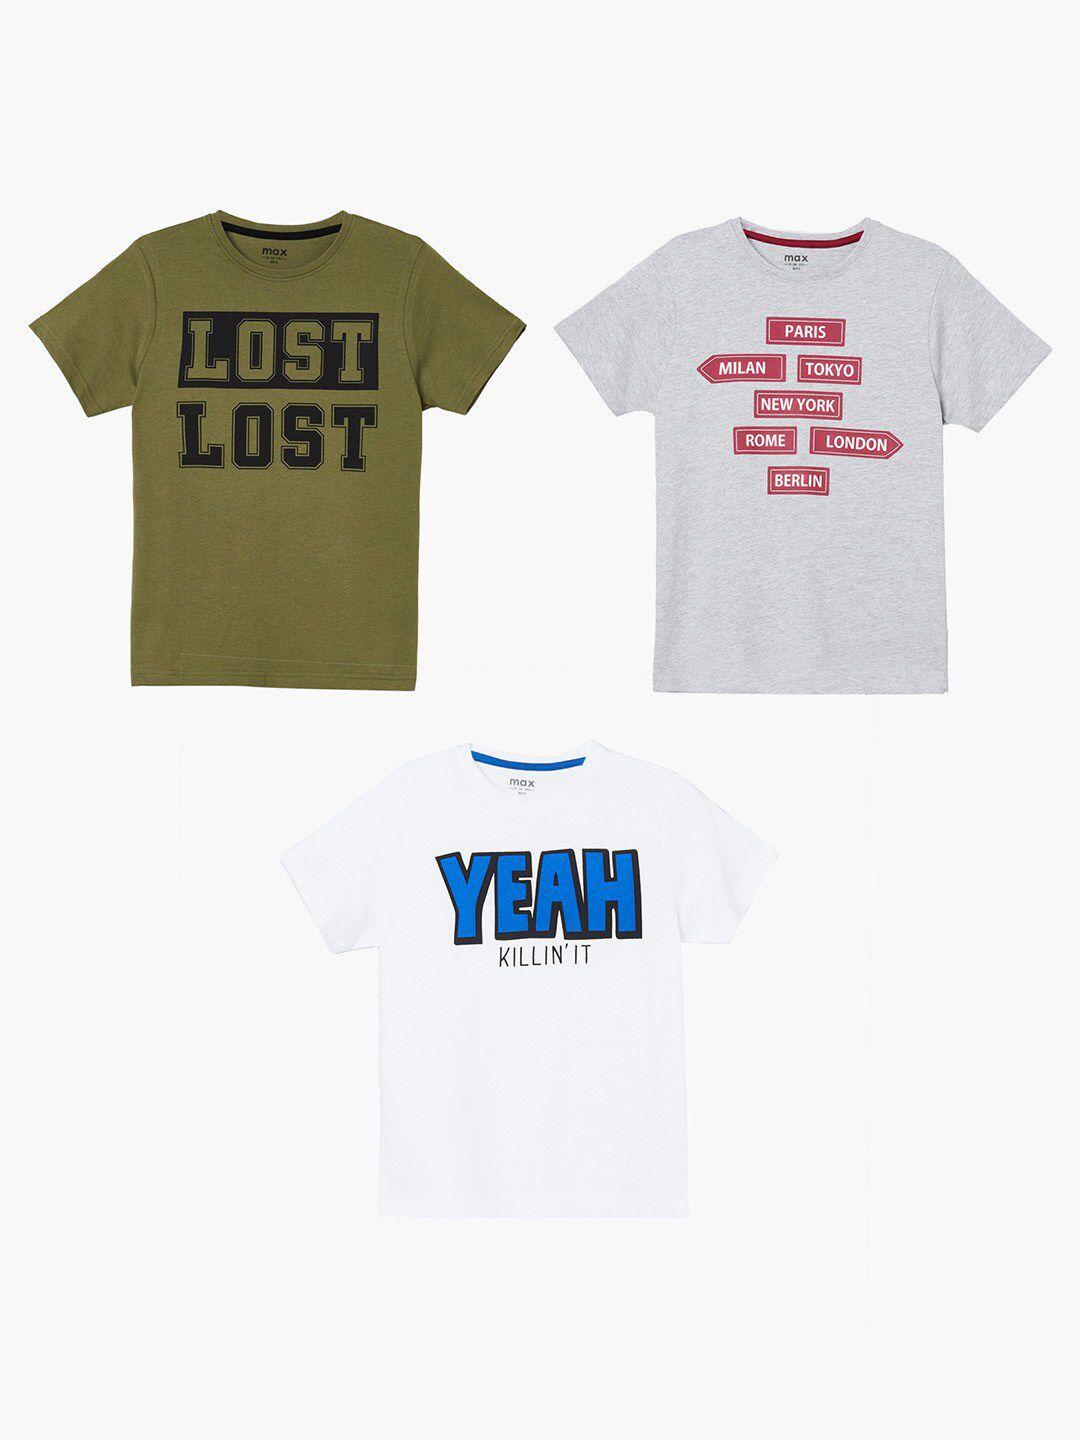 max-boys-olive-green-&-grey-typography-3-printed-cotton-t-shirts